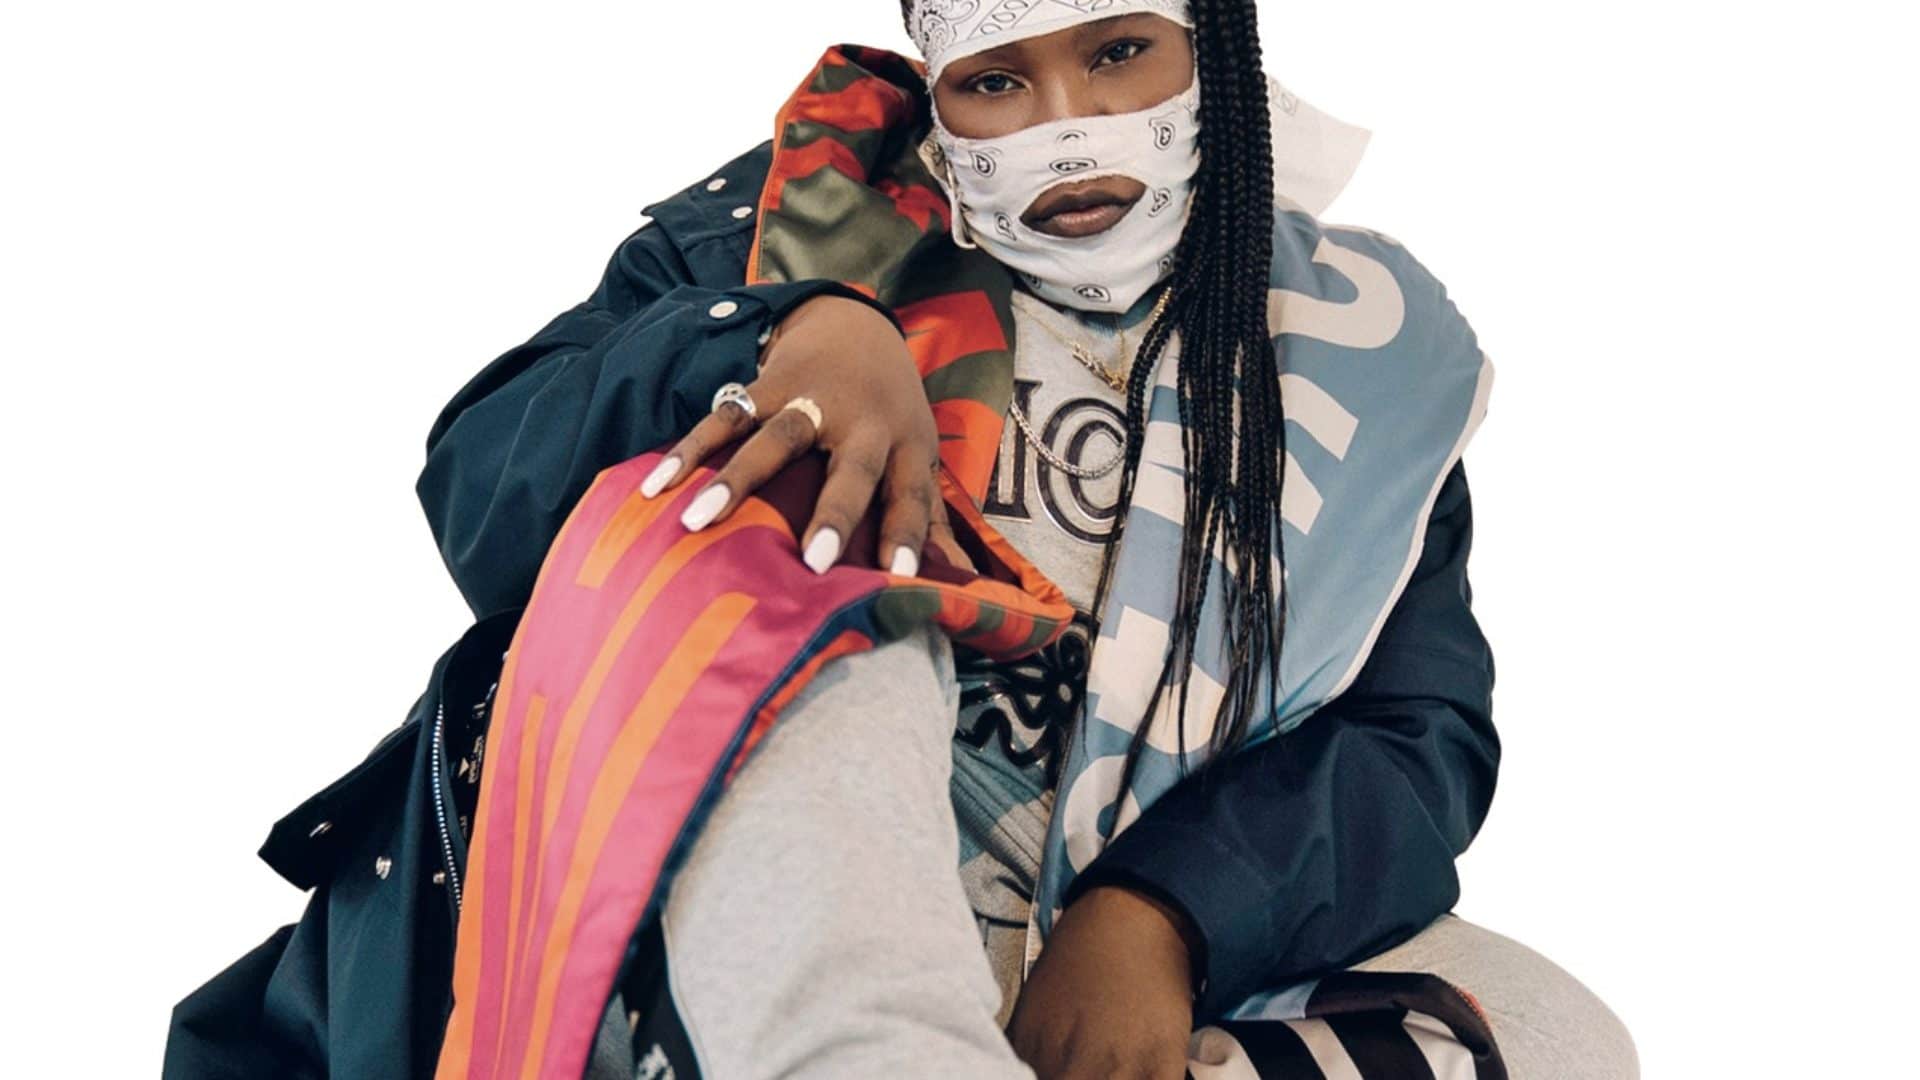 Leikeli47 Breaks Down The Secret To Her Success (And It Has Nothing To Do With Her Face Mask)